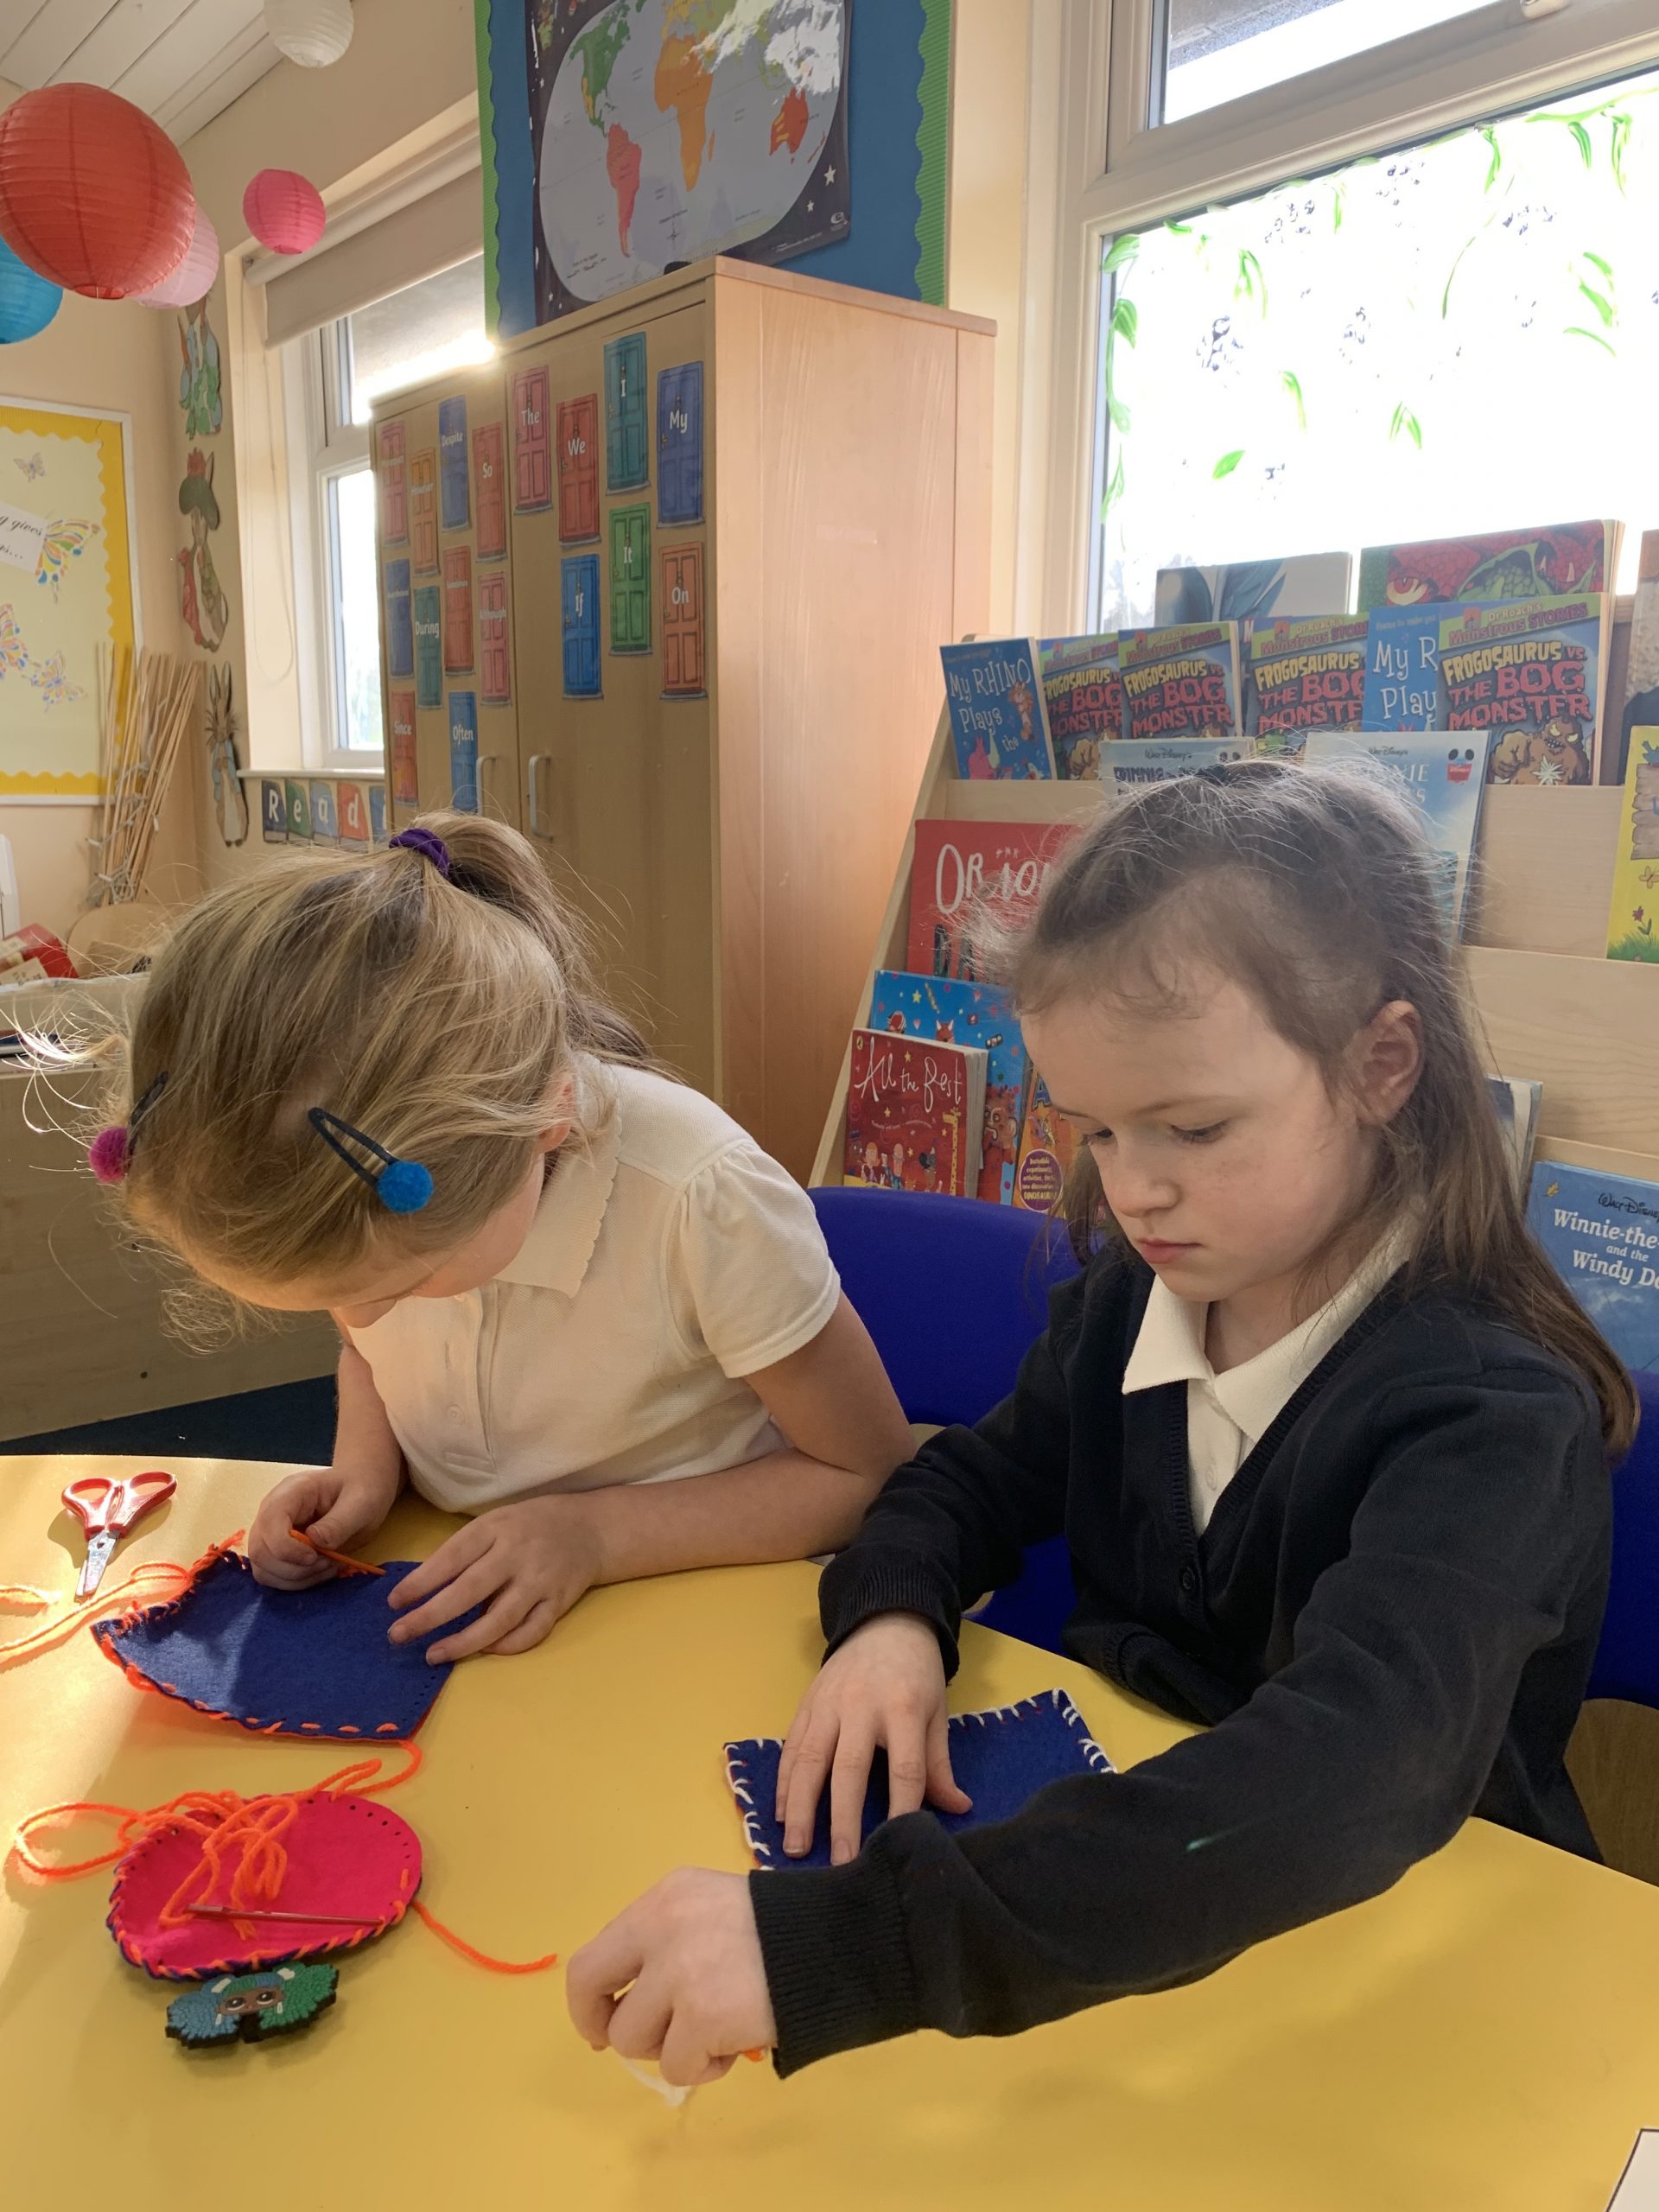 Year 2 children working on their DT projects